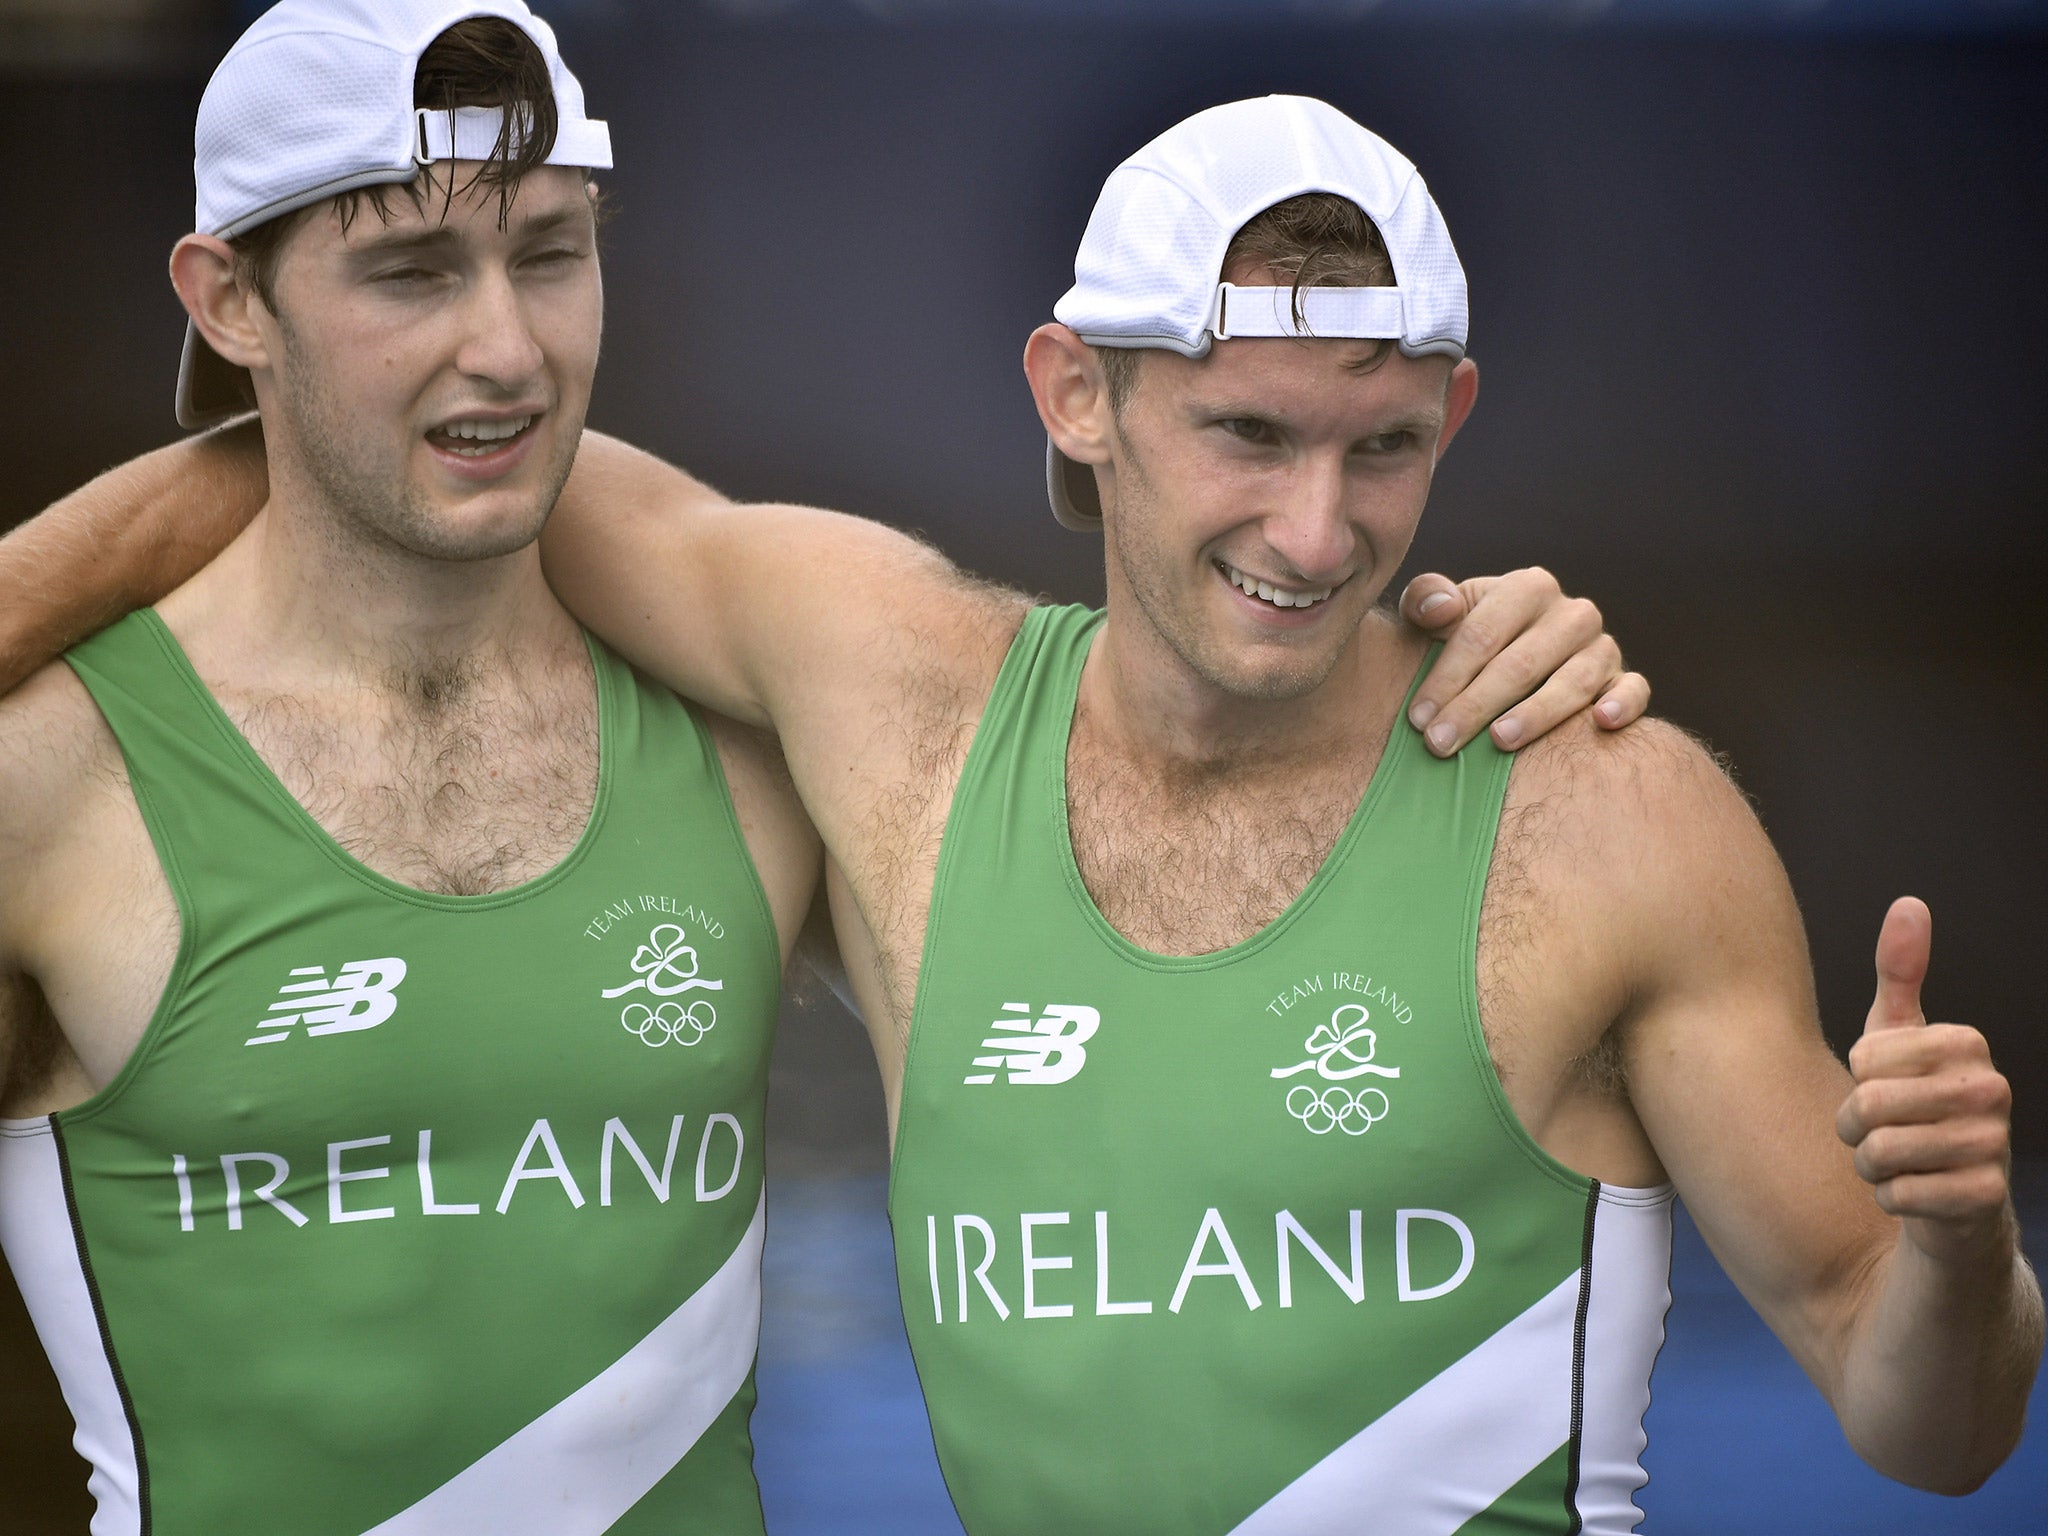 Gary O'Donovan gives the thumbs up alongside his brother Paul after claiming silver in the men's lightweight double sculls